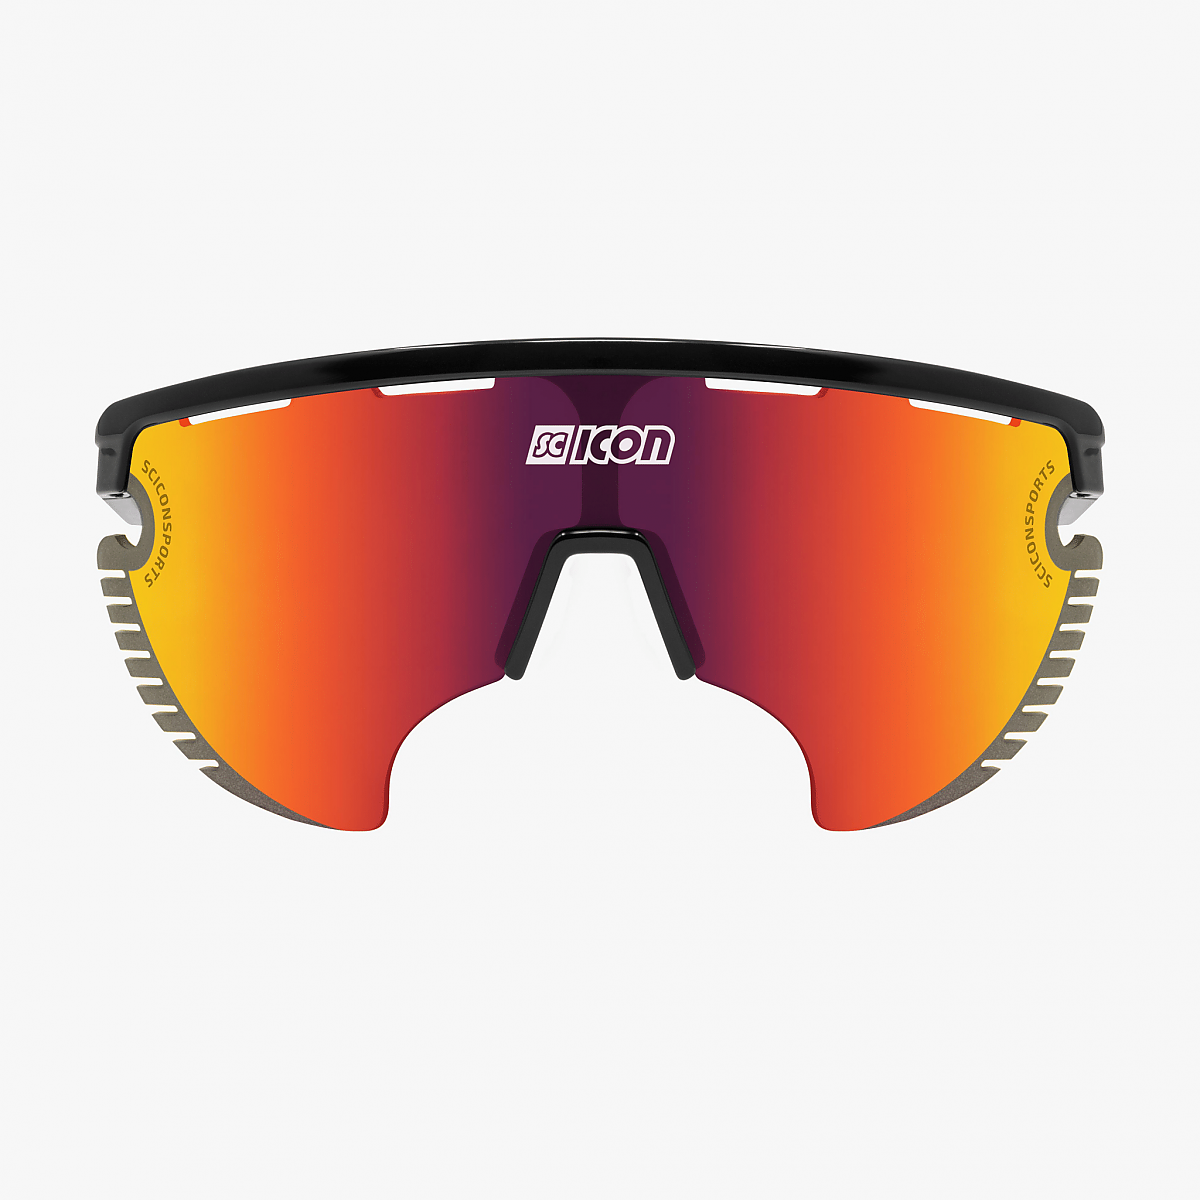 Scicon Sports releases Aerowing Lamon sunglasses | Bicycle Retailer and ...